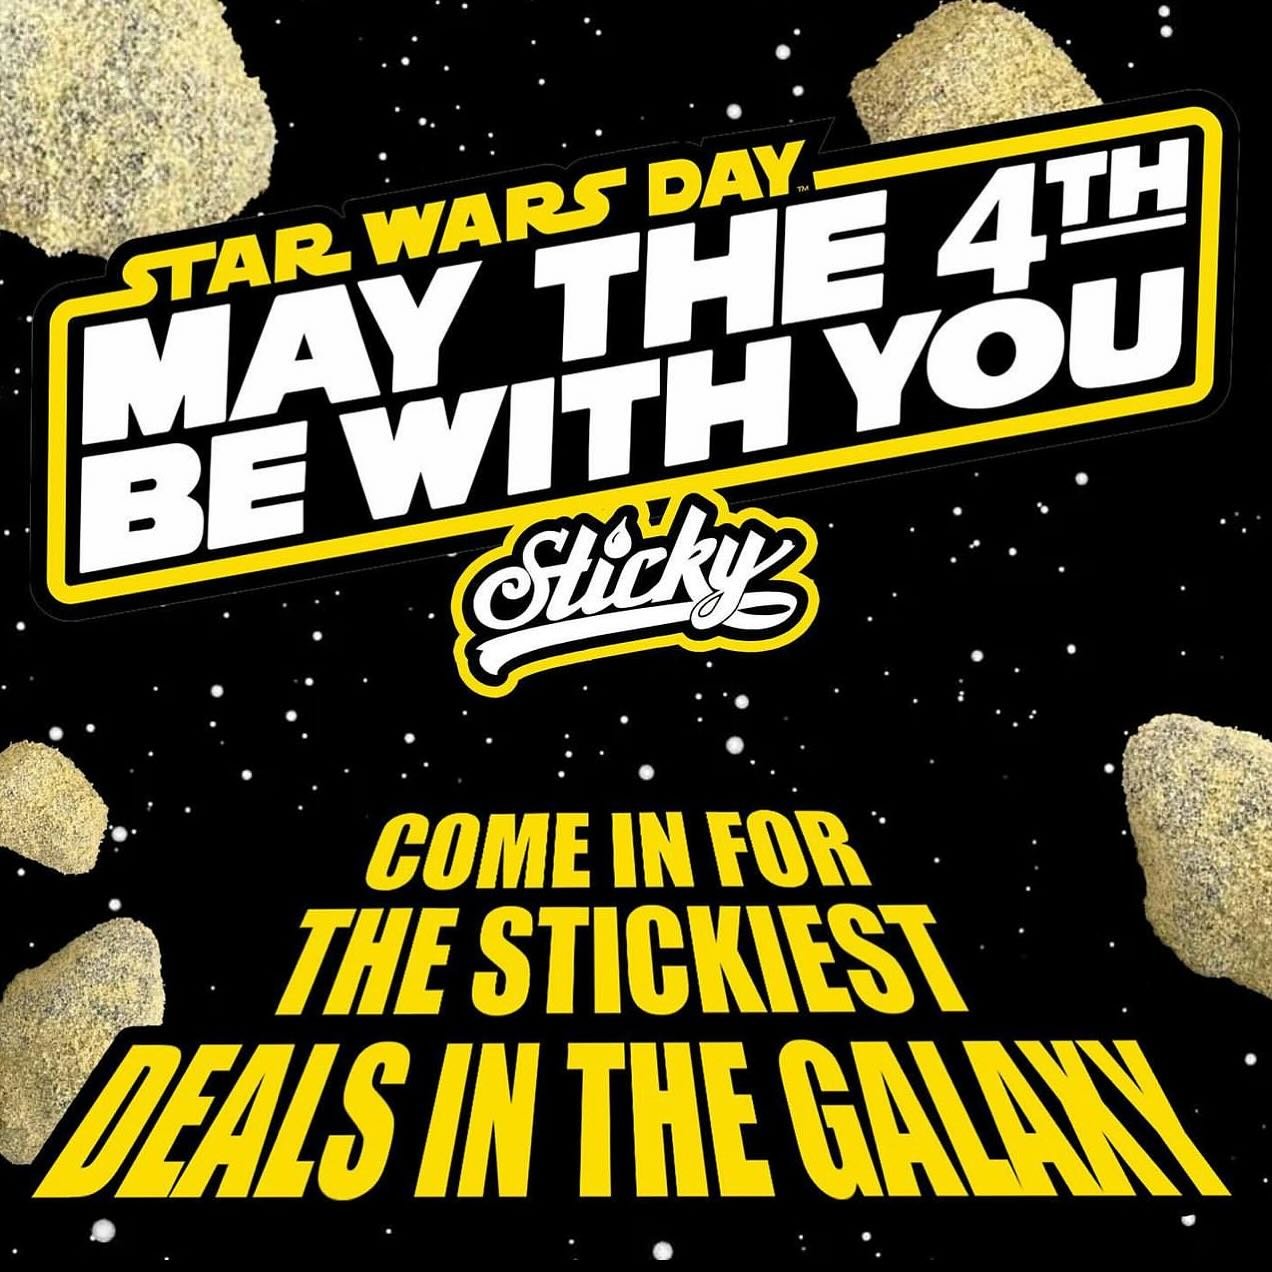 Happy Star Wars Day!! 🌠🌌
Be sure to stop by for the galaxy&rsquo;s favorite spot for space goodies. 🌕 🪨
(In accordance with Galactic Empire Regulations on Imported Goods.)

Nothing for Sale. 21+. For educational purposes only. 
#starwars #starwar